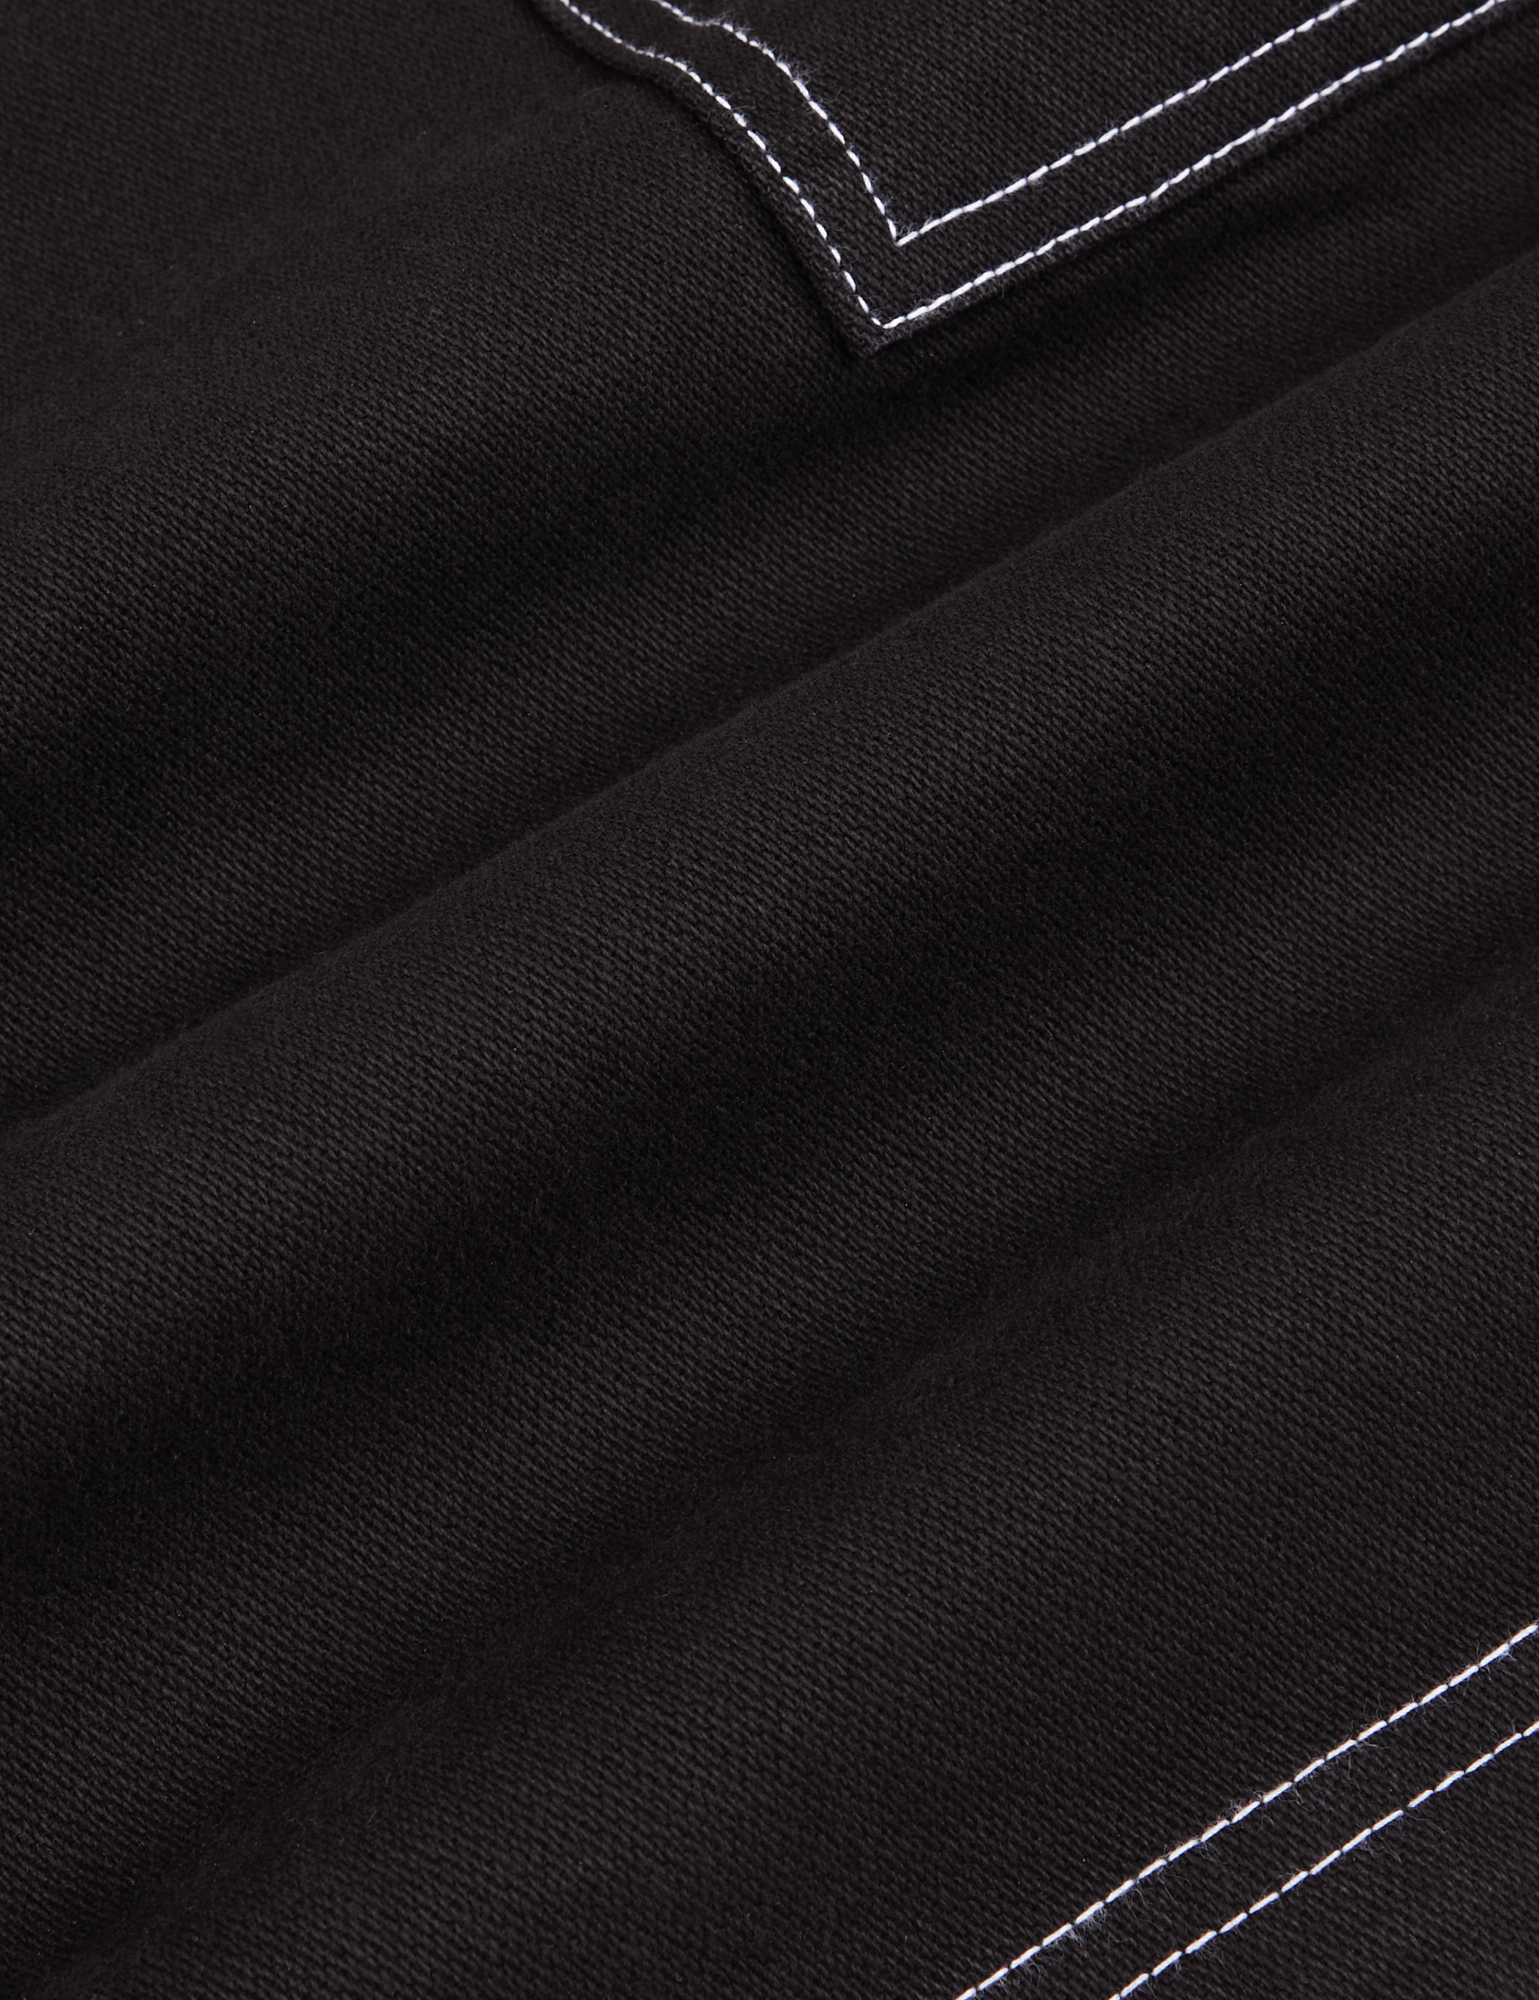 Carpenter Shorts in Basic Black fabric detail close up.Contrast white stitching. 